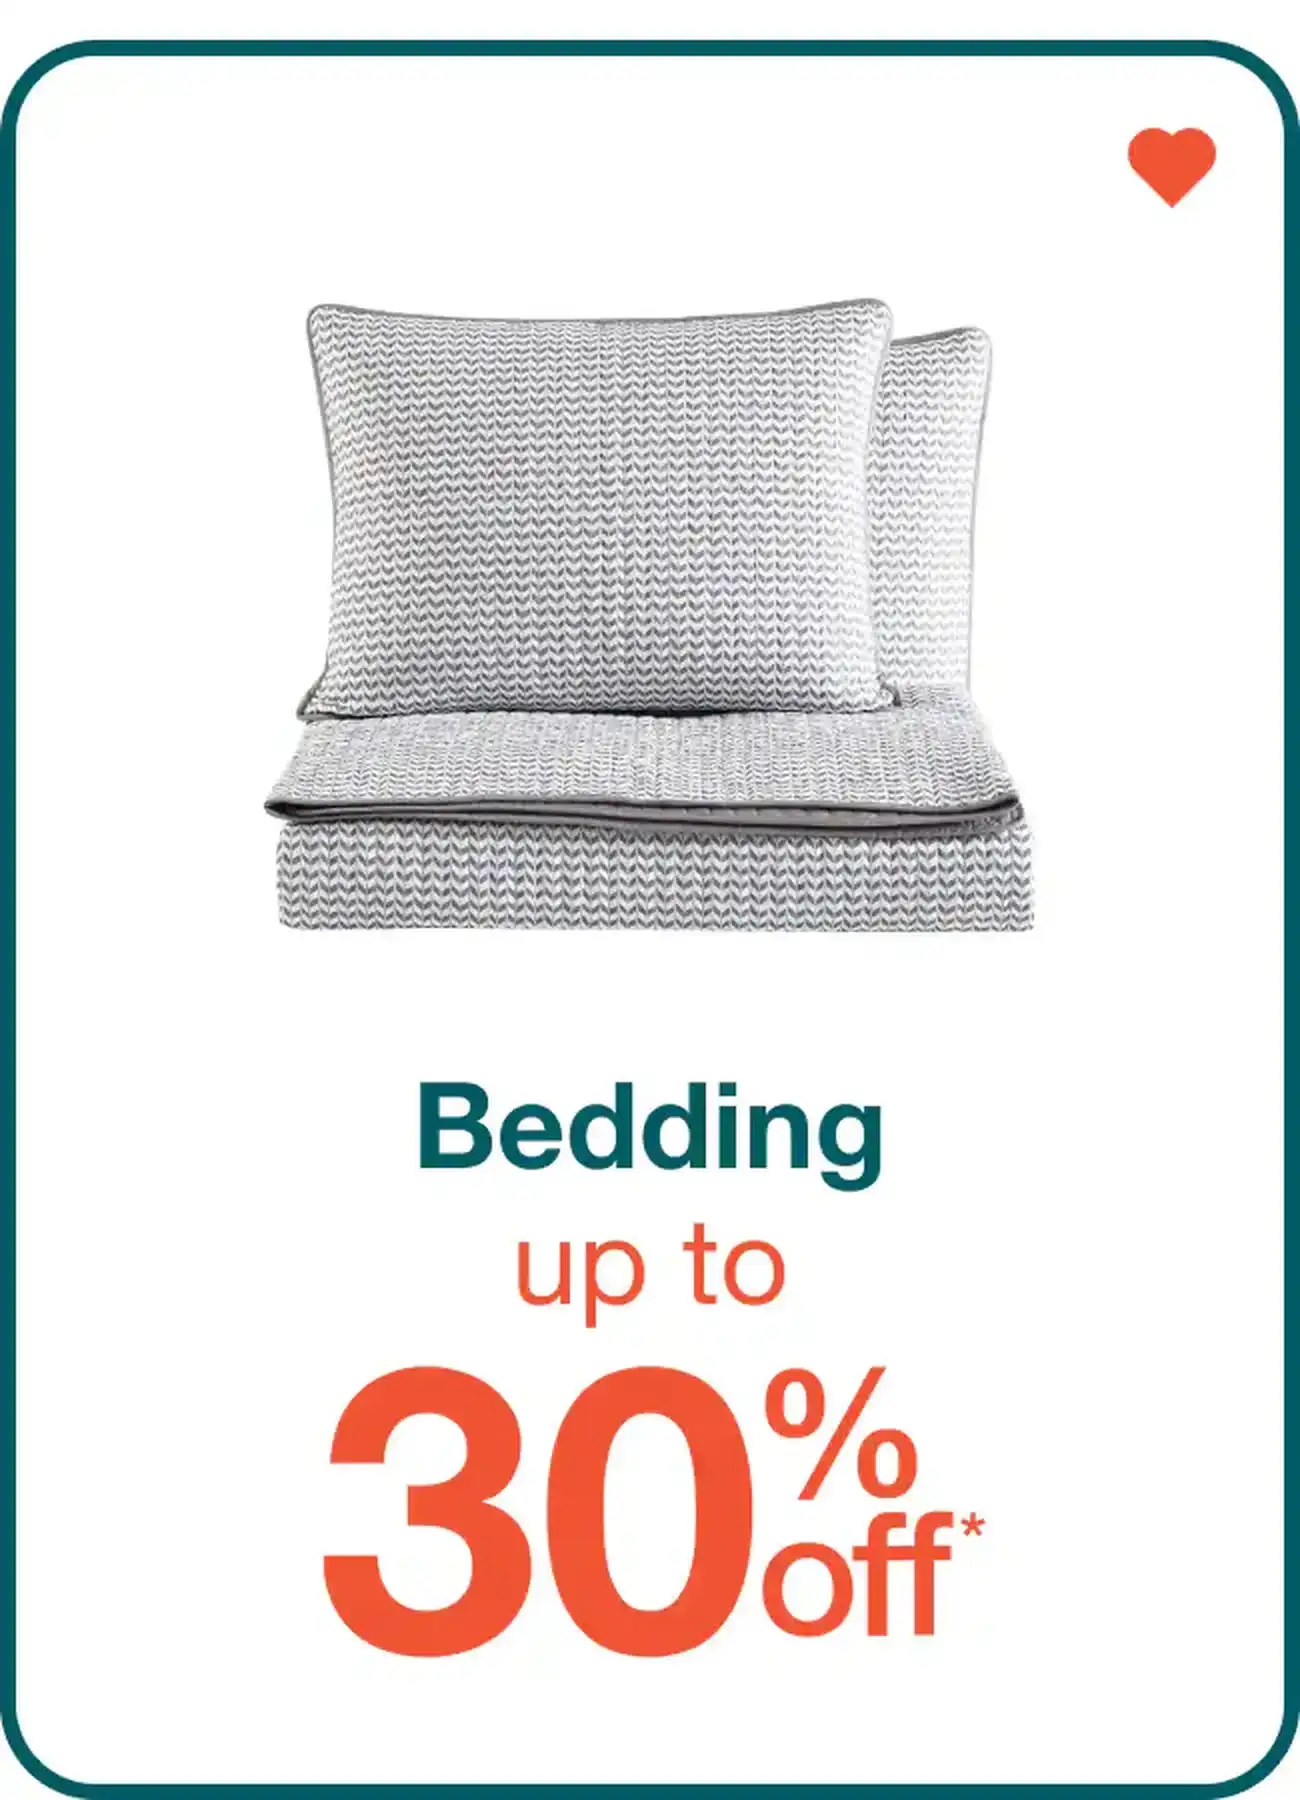 Up to 30% Off Bedding